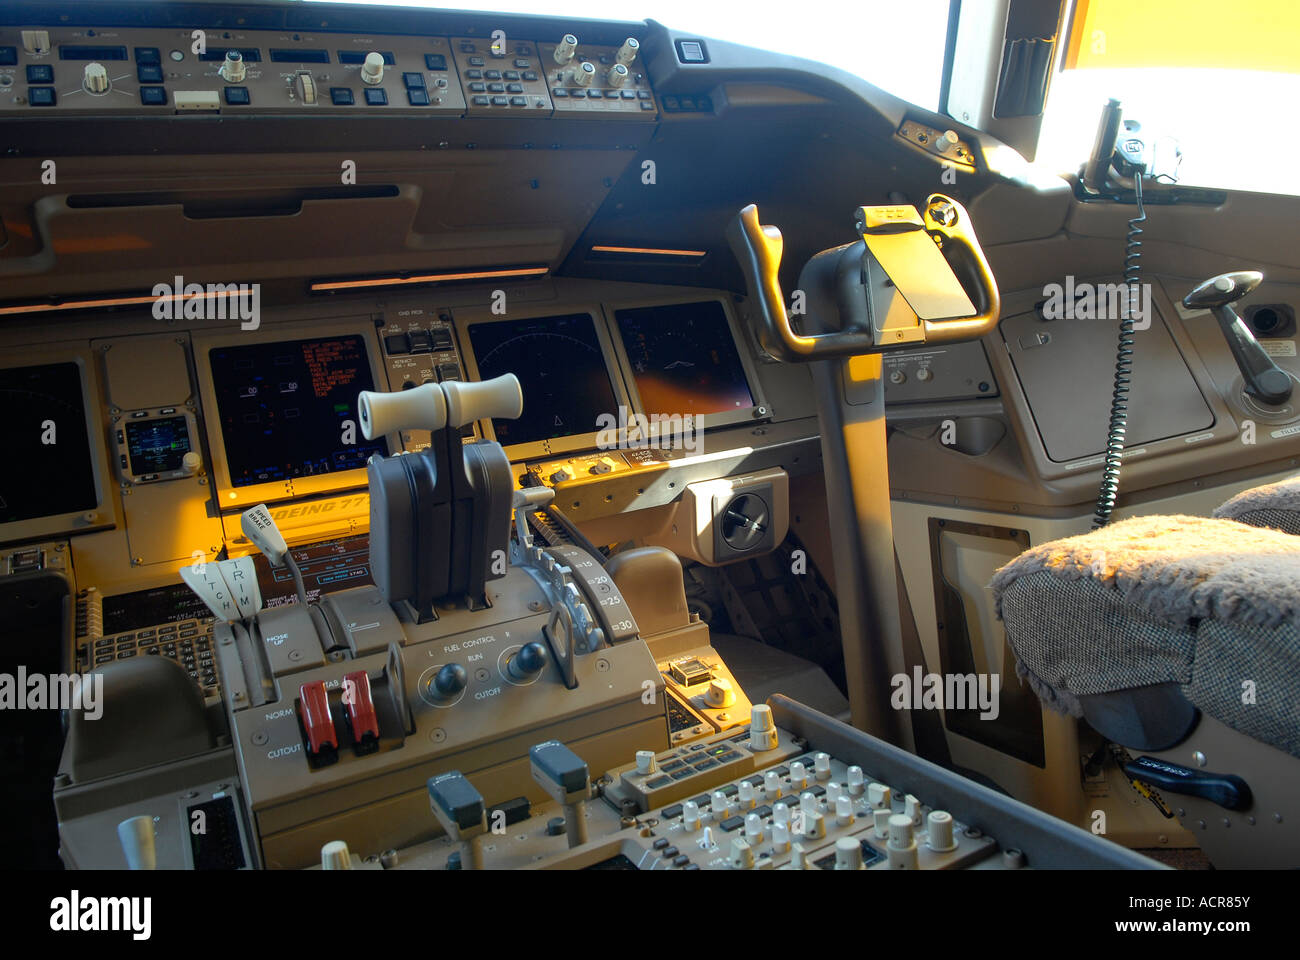 Flight instruments on an instrument panel in a cockpit of Boeing 777 aircraft, showing instrumentation dials and control yokes Stock Photo